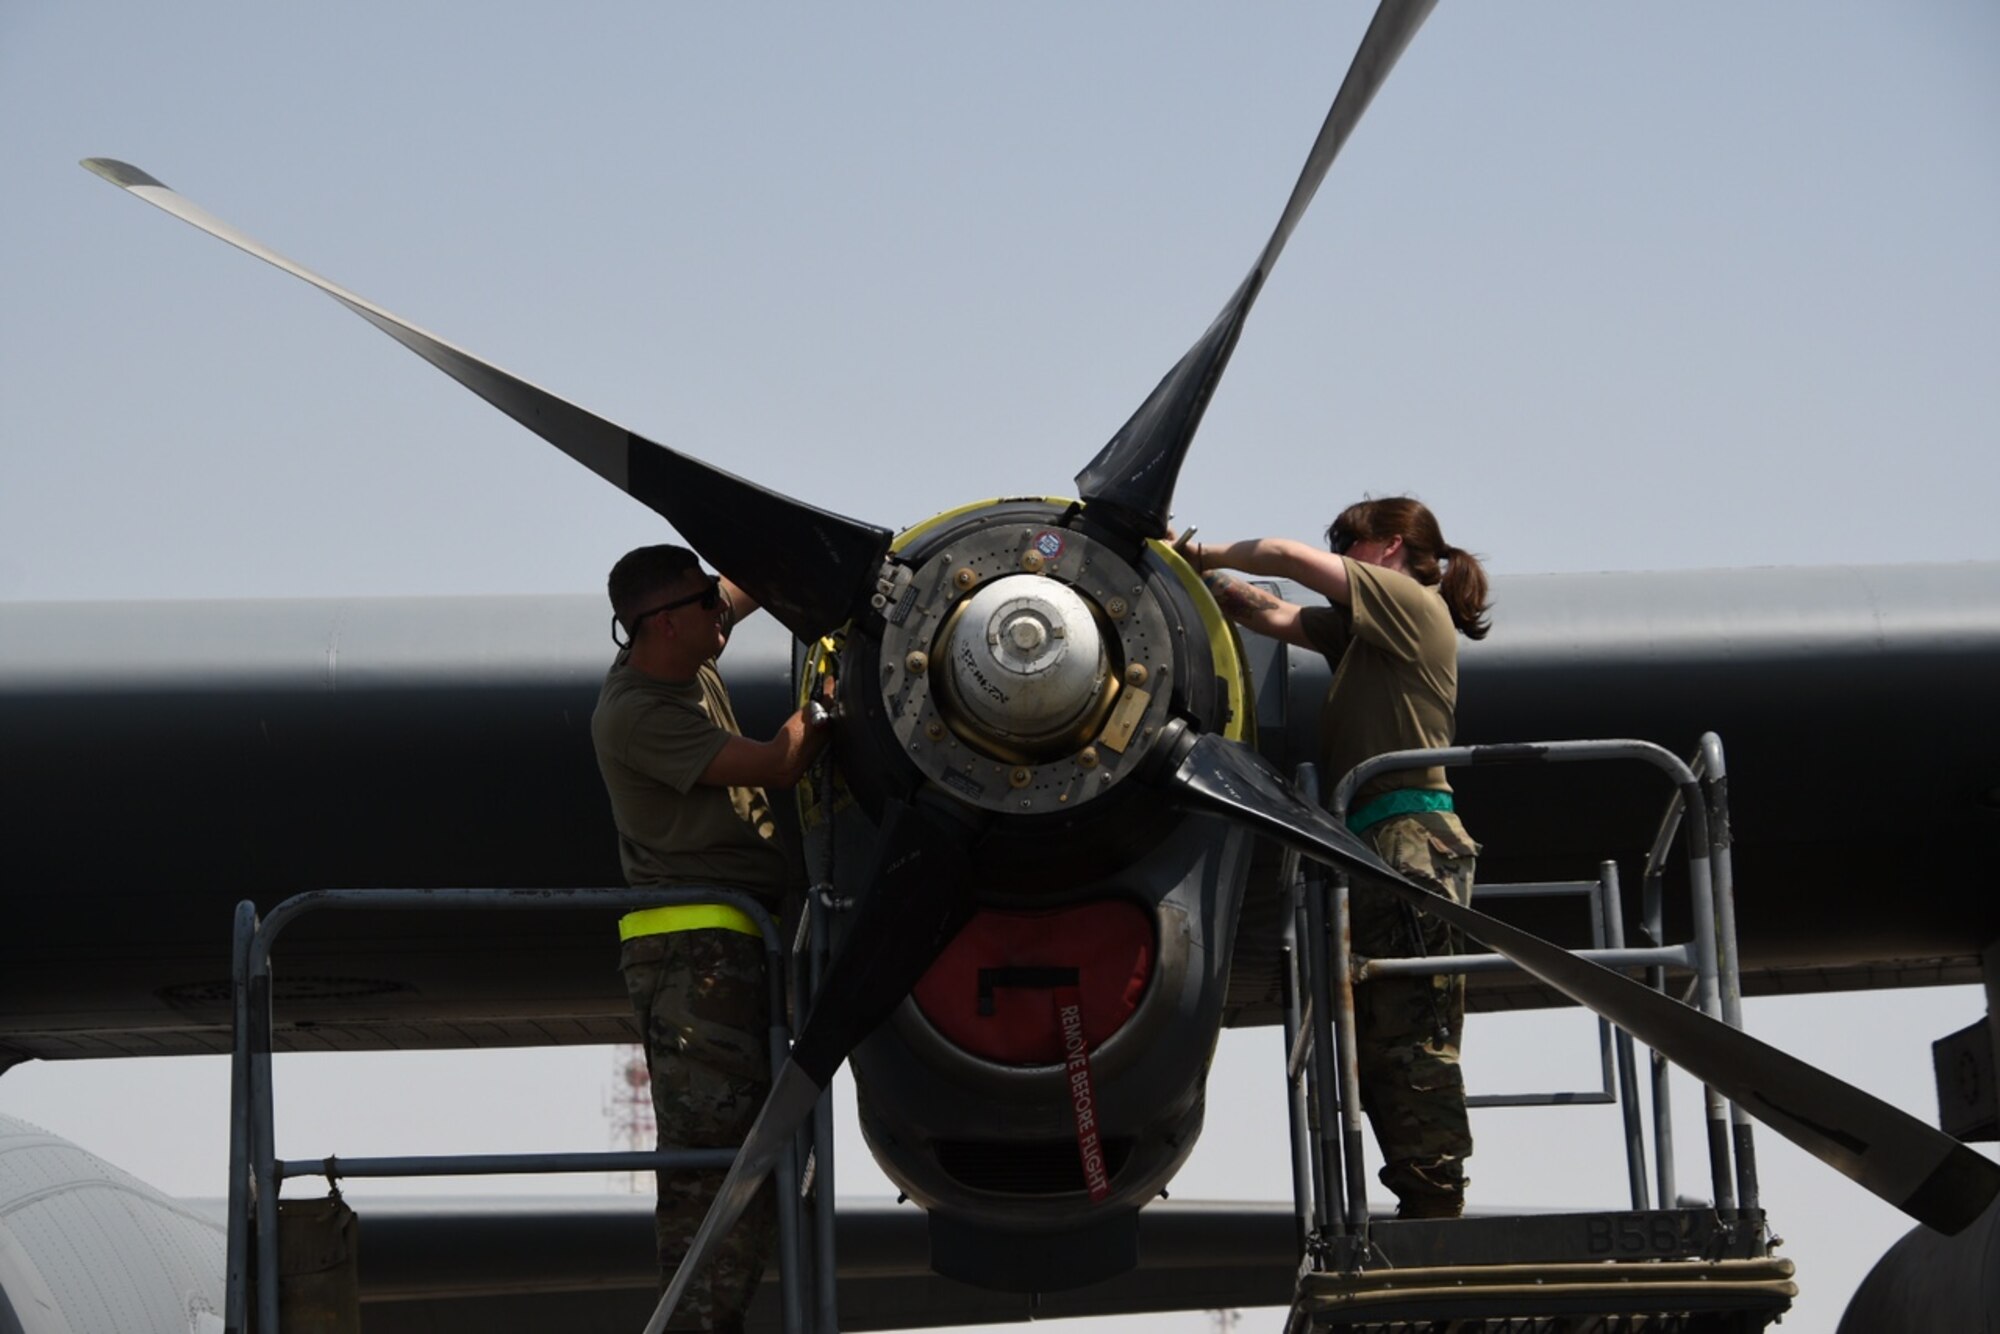 U.S. Air Force Tech. Sgt. Jonathan Hall, a propulsion technician assigned to the 386th Expeditionary Aircraft Maintenance Squadron and deployed from Maxwell Air Force Base, Alabama, and U.S. Air Force Staff Sgt. Cecilia Nguyen, a propulsion technician assigned to the 386th EAMXS and deployed from Maxwell AFB, change a propeller on a C-130 Hercules. The EAMXS works 24-hour operations year-round to keep the C-130 Hercules’ in flight to accomplish the mission of fight to win today and to provide warfighter support in the area of responsibility. (Courtesy Photo)